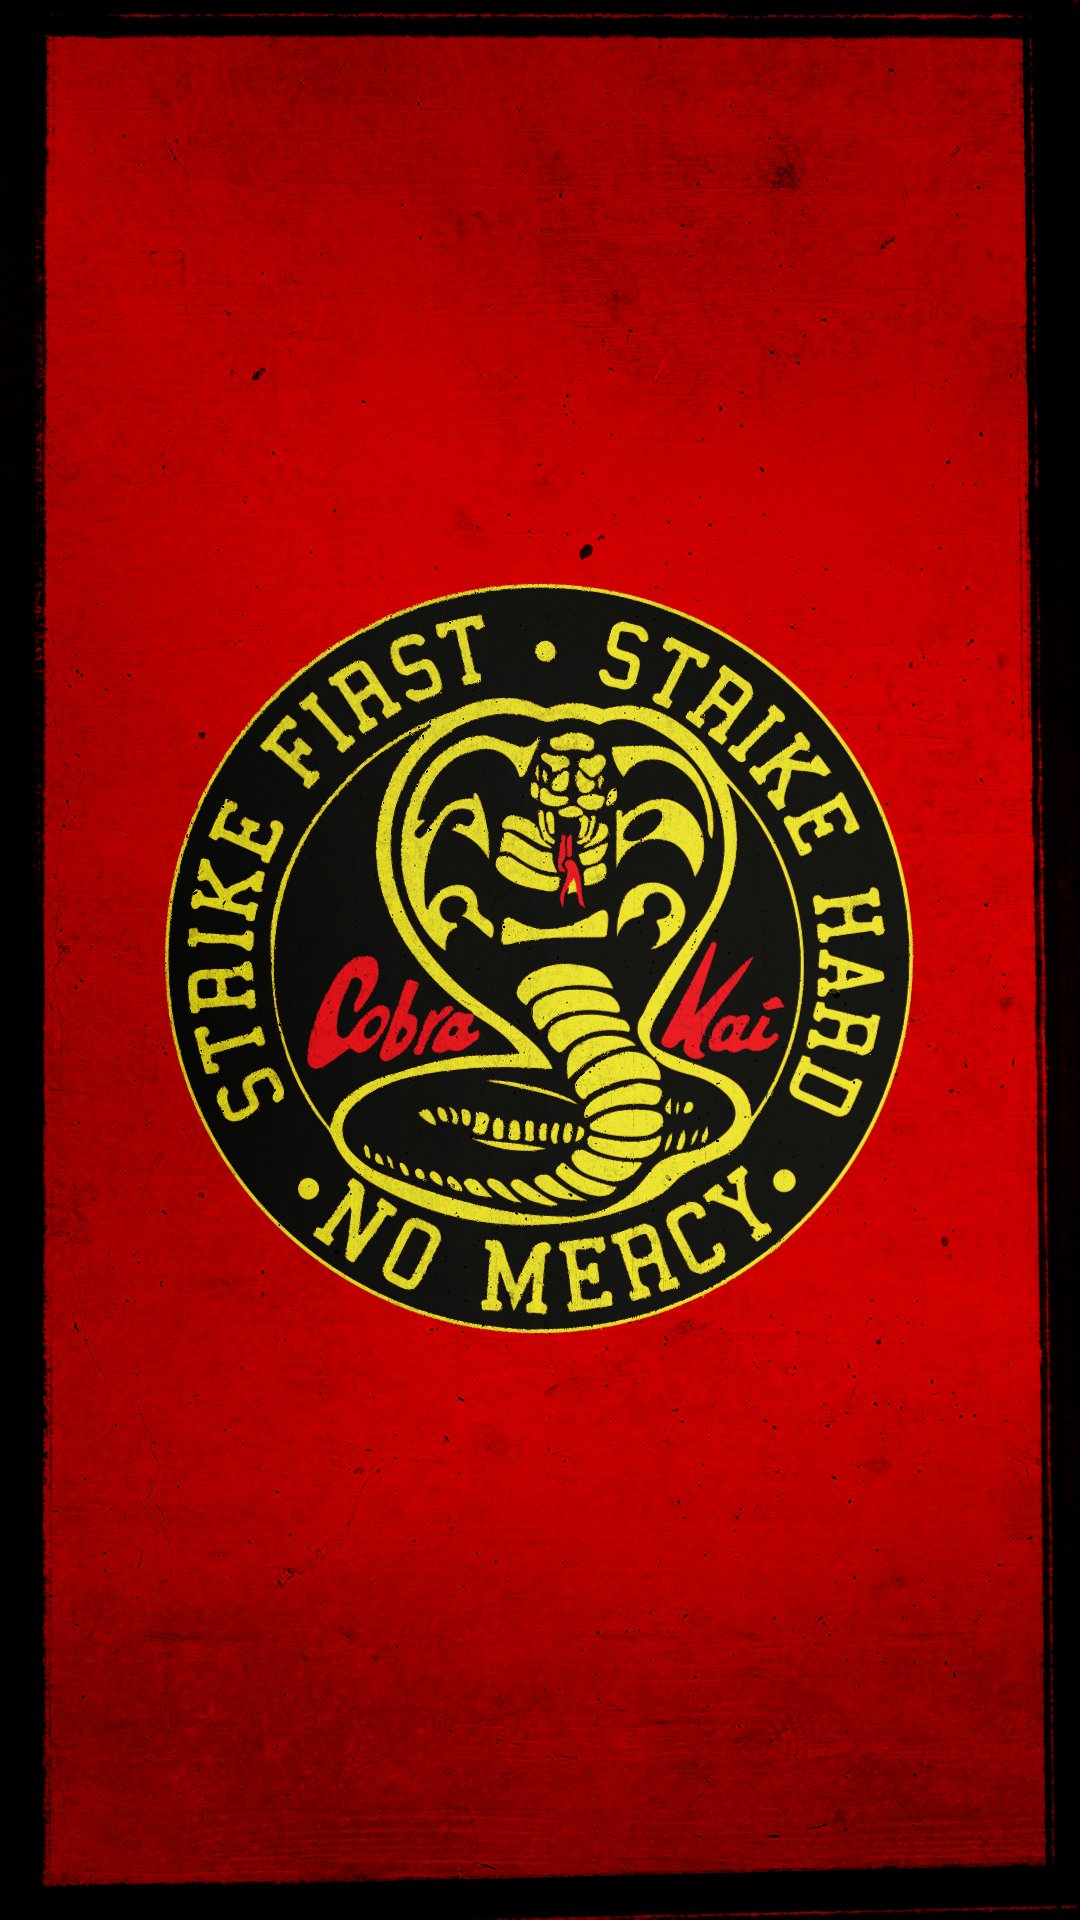 Cobra Kai badass wallpaper are you gonna use for your smartphone?